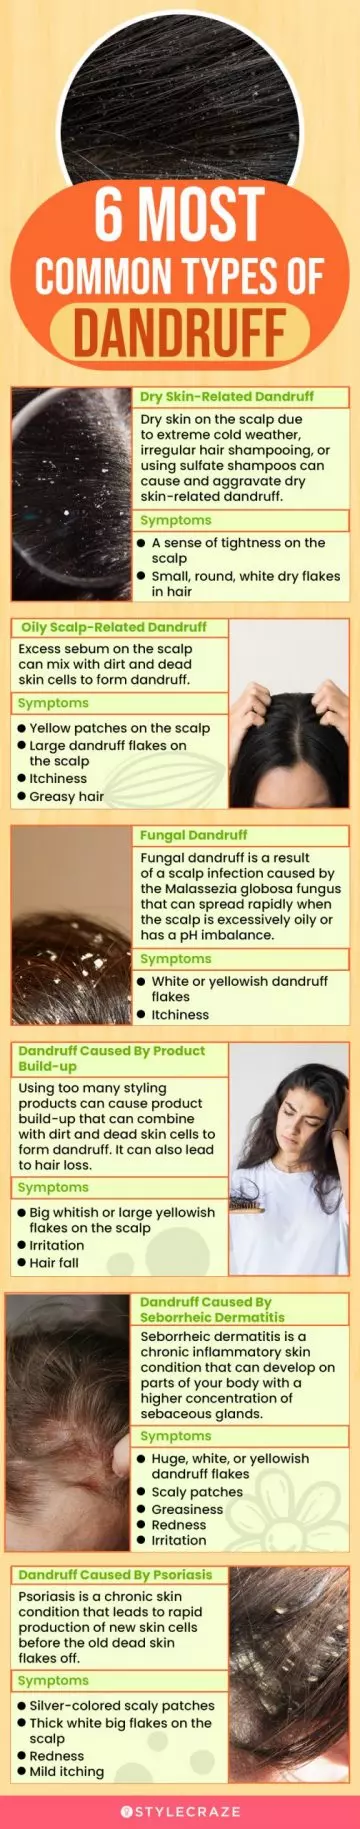 6 most common types of dandruff (infographic)